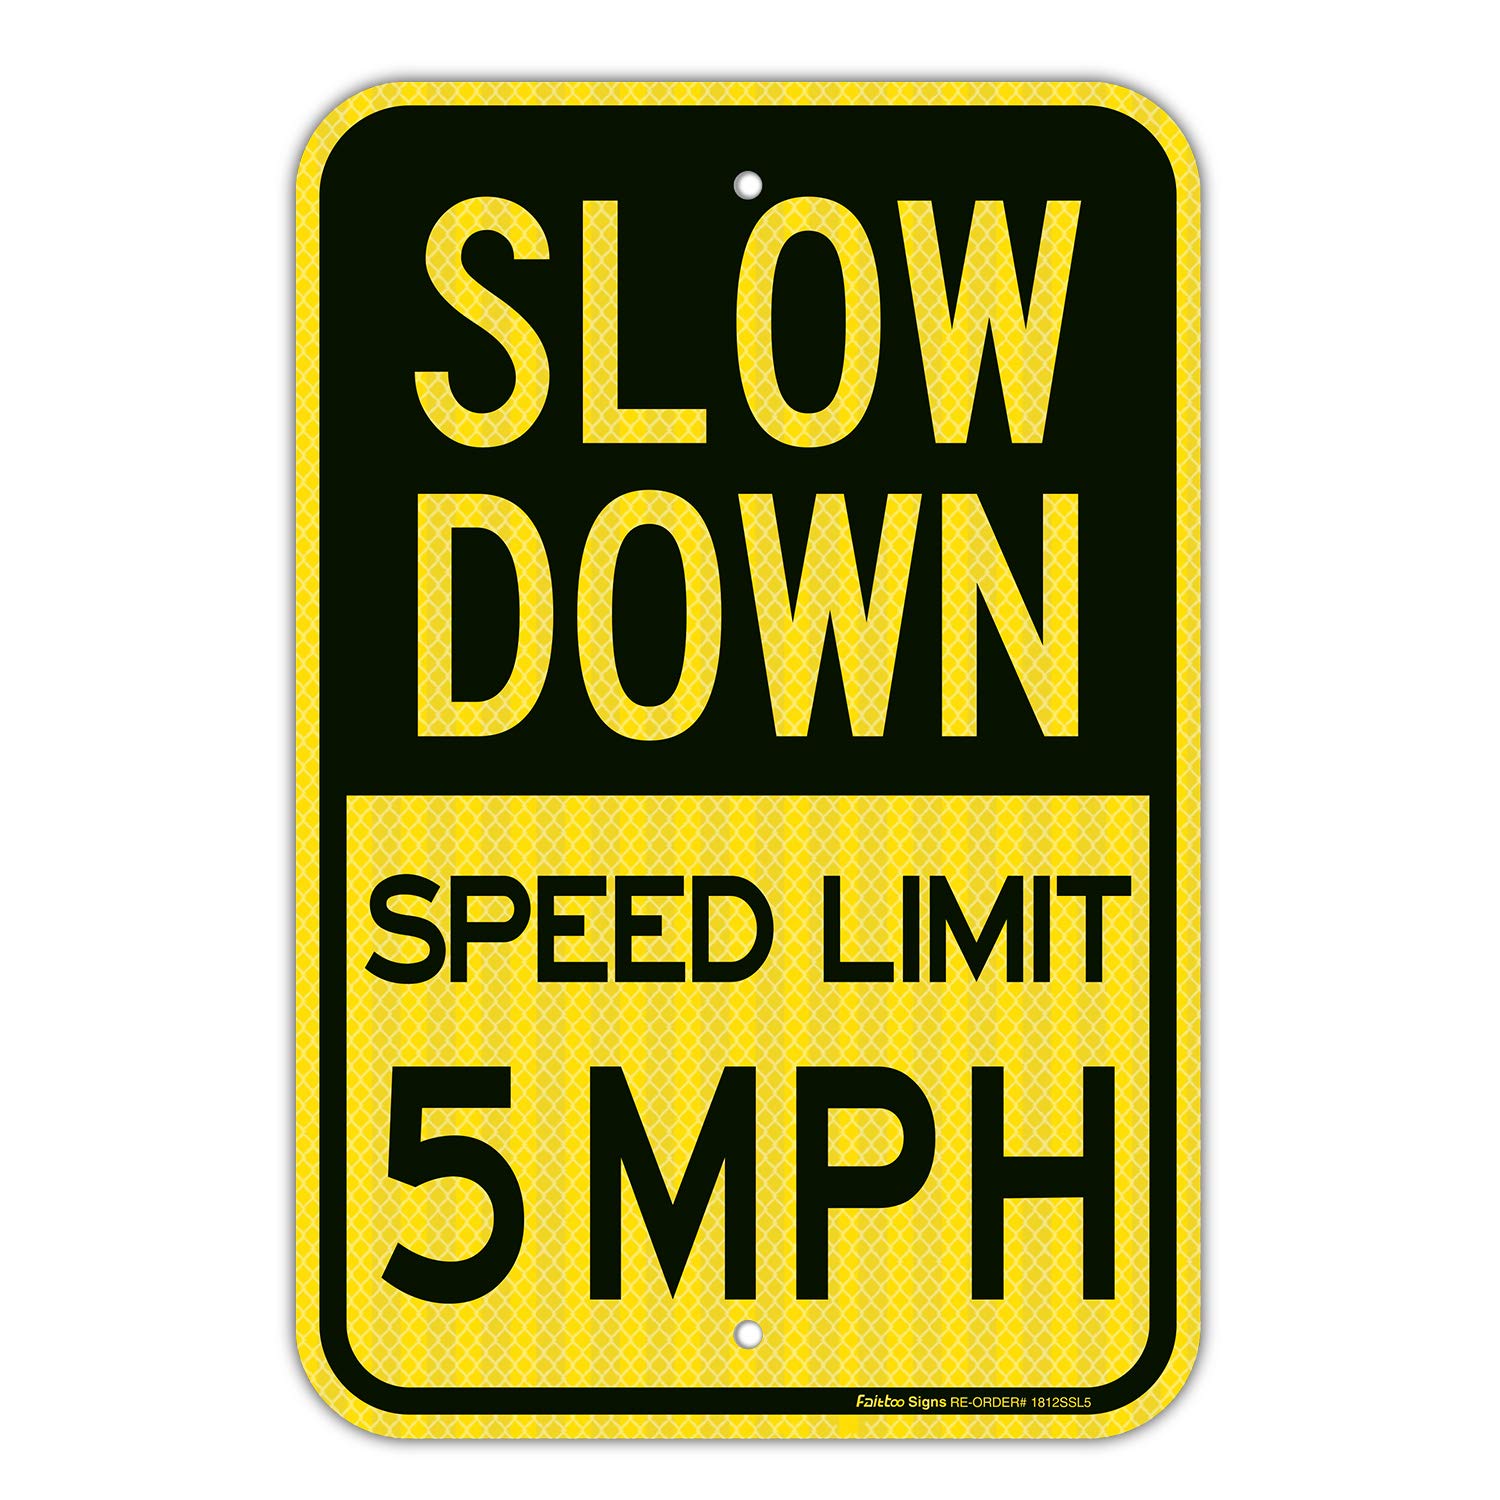 Slow Down Speed Limit 5 MPH Sign, Slow Down Sign, 18 x 12 Inches Engineer Grade Reflective Sheeting, Rust Free Aluminum, Weather Resistant, Waterproof, Durable Ink, Easy to Mount